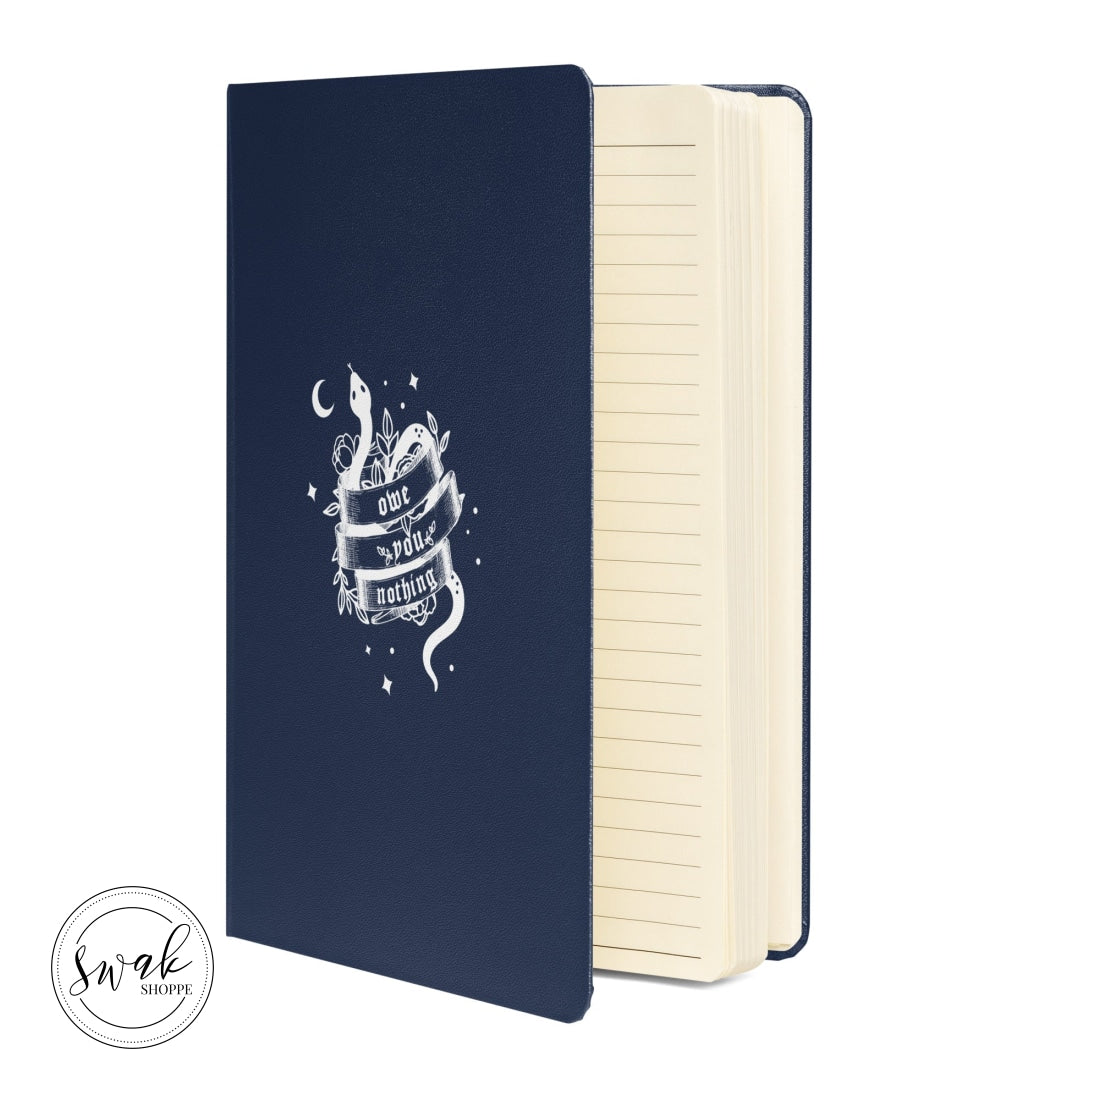 Owe You Nothing Did Something Bad Hardcover Bound Notebook